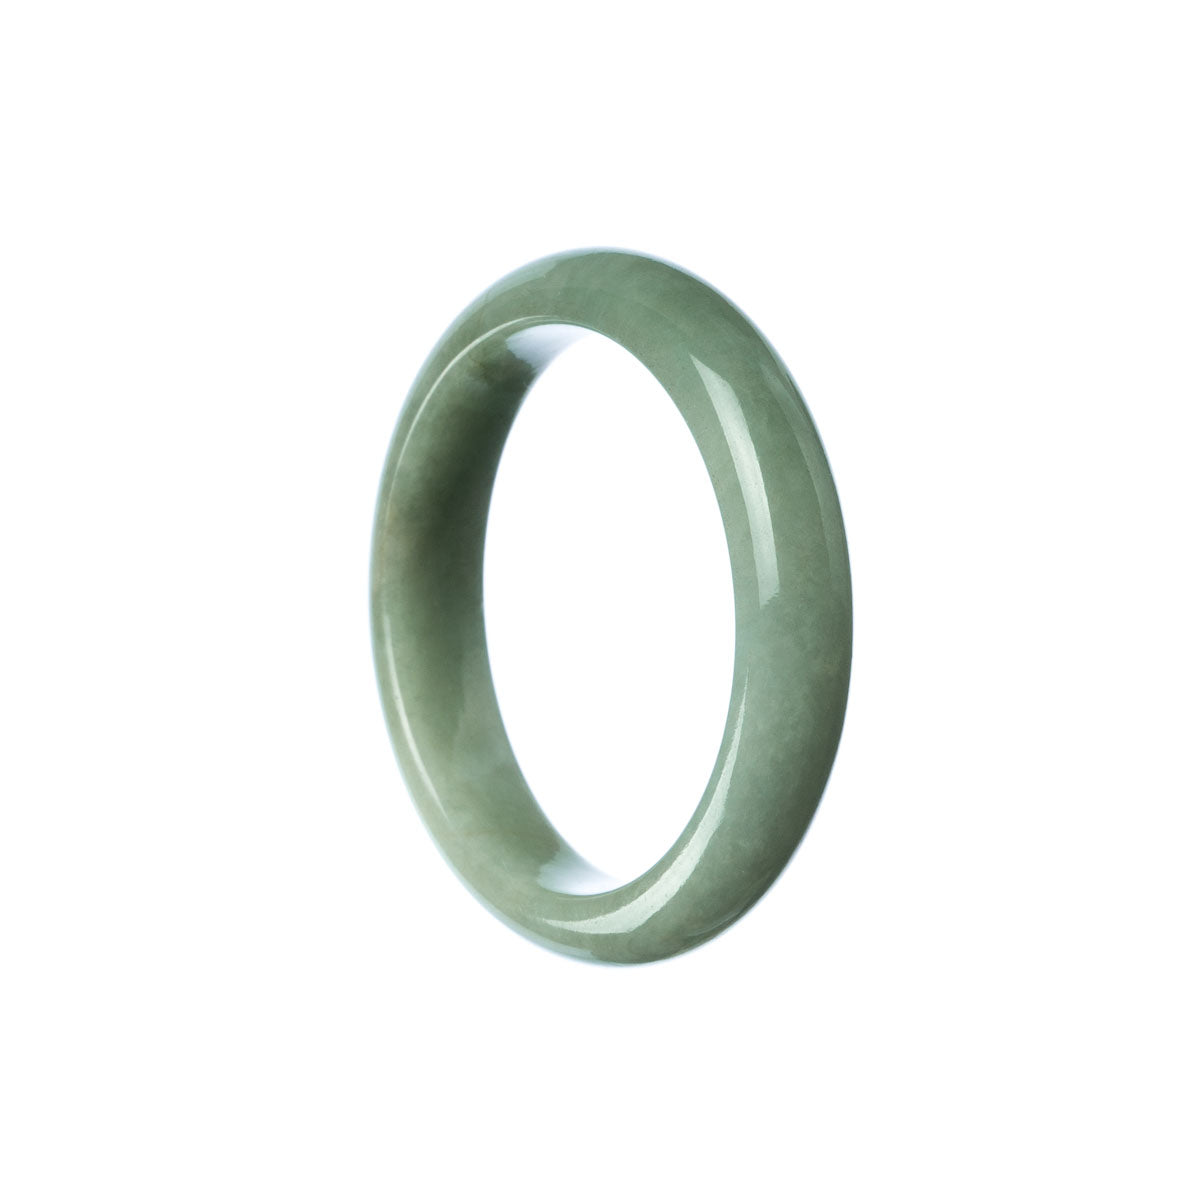 A half moon-shaped green jade bangle bracelet made of authentic Type A green jadeite jade, perfect for a child.